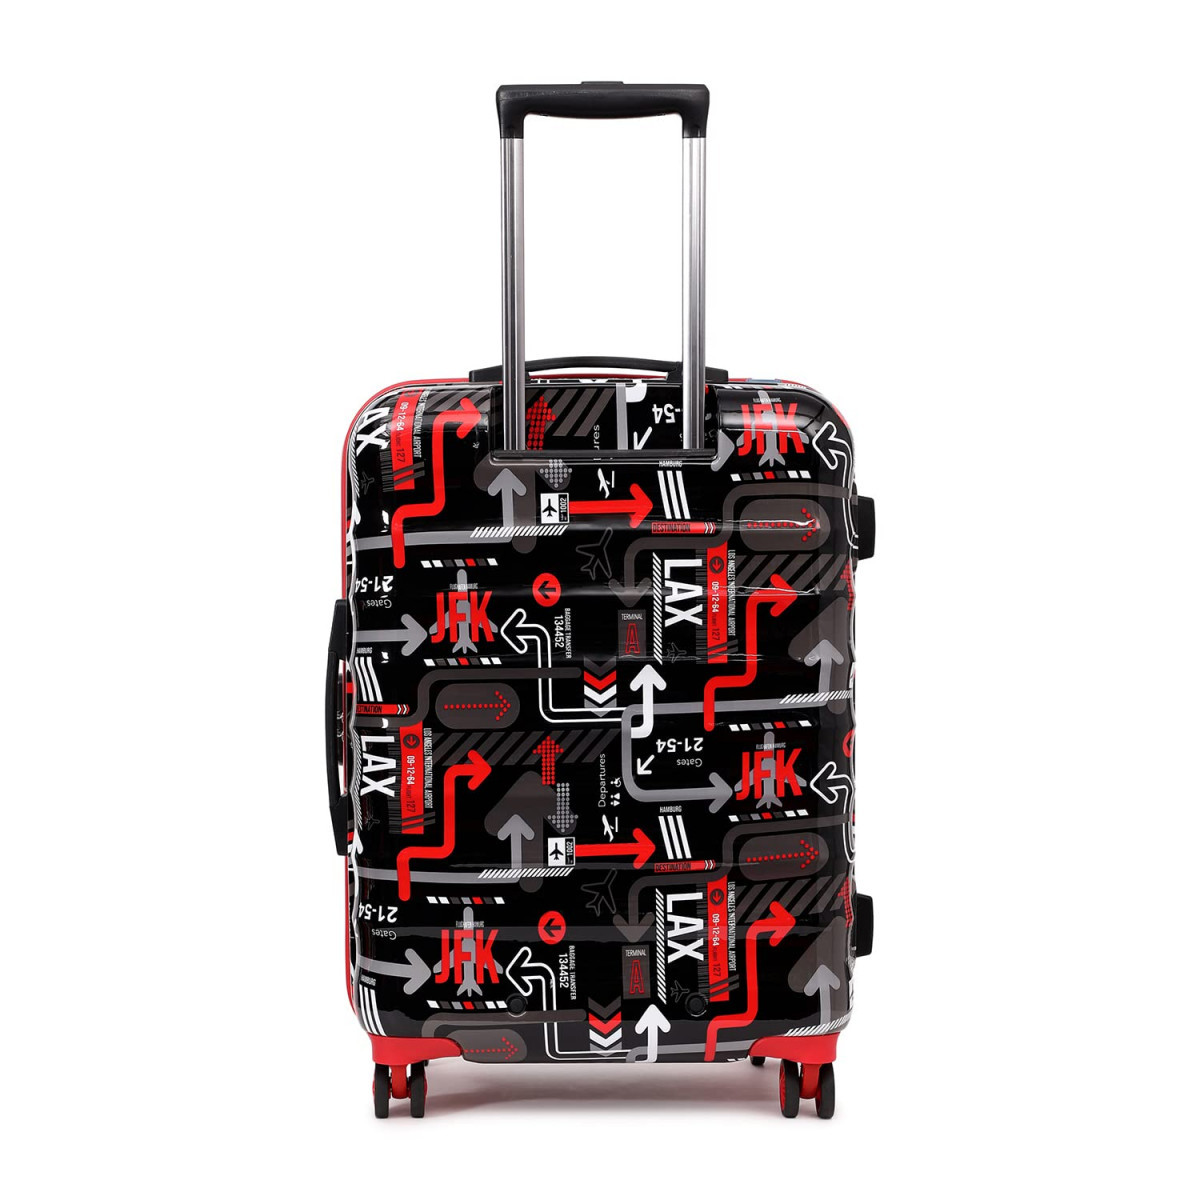 uppercase Jfk Trolley Bag Set Of 2 ML Check-In Luggage Hardsided Polycarbonate Printed Luggage Combination Lock 8 Wheel Bag Suitcase 2000 Days Warranty Black 31 X 53 X 755 Cm Spinner